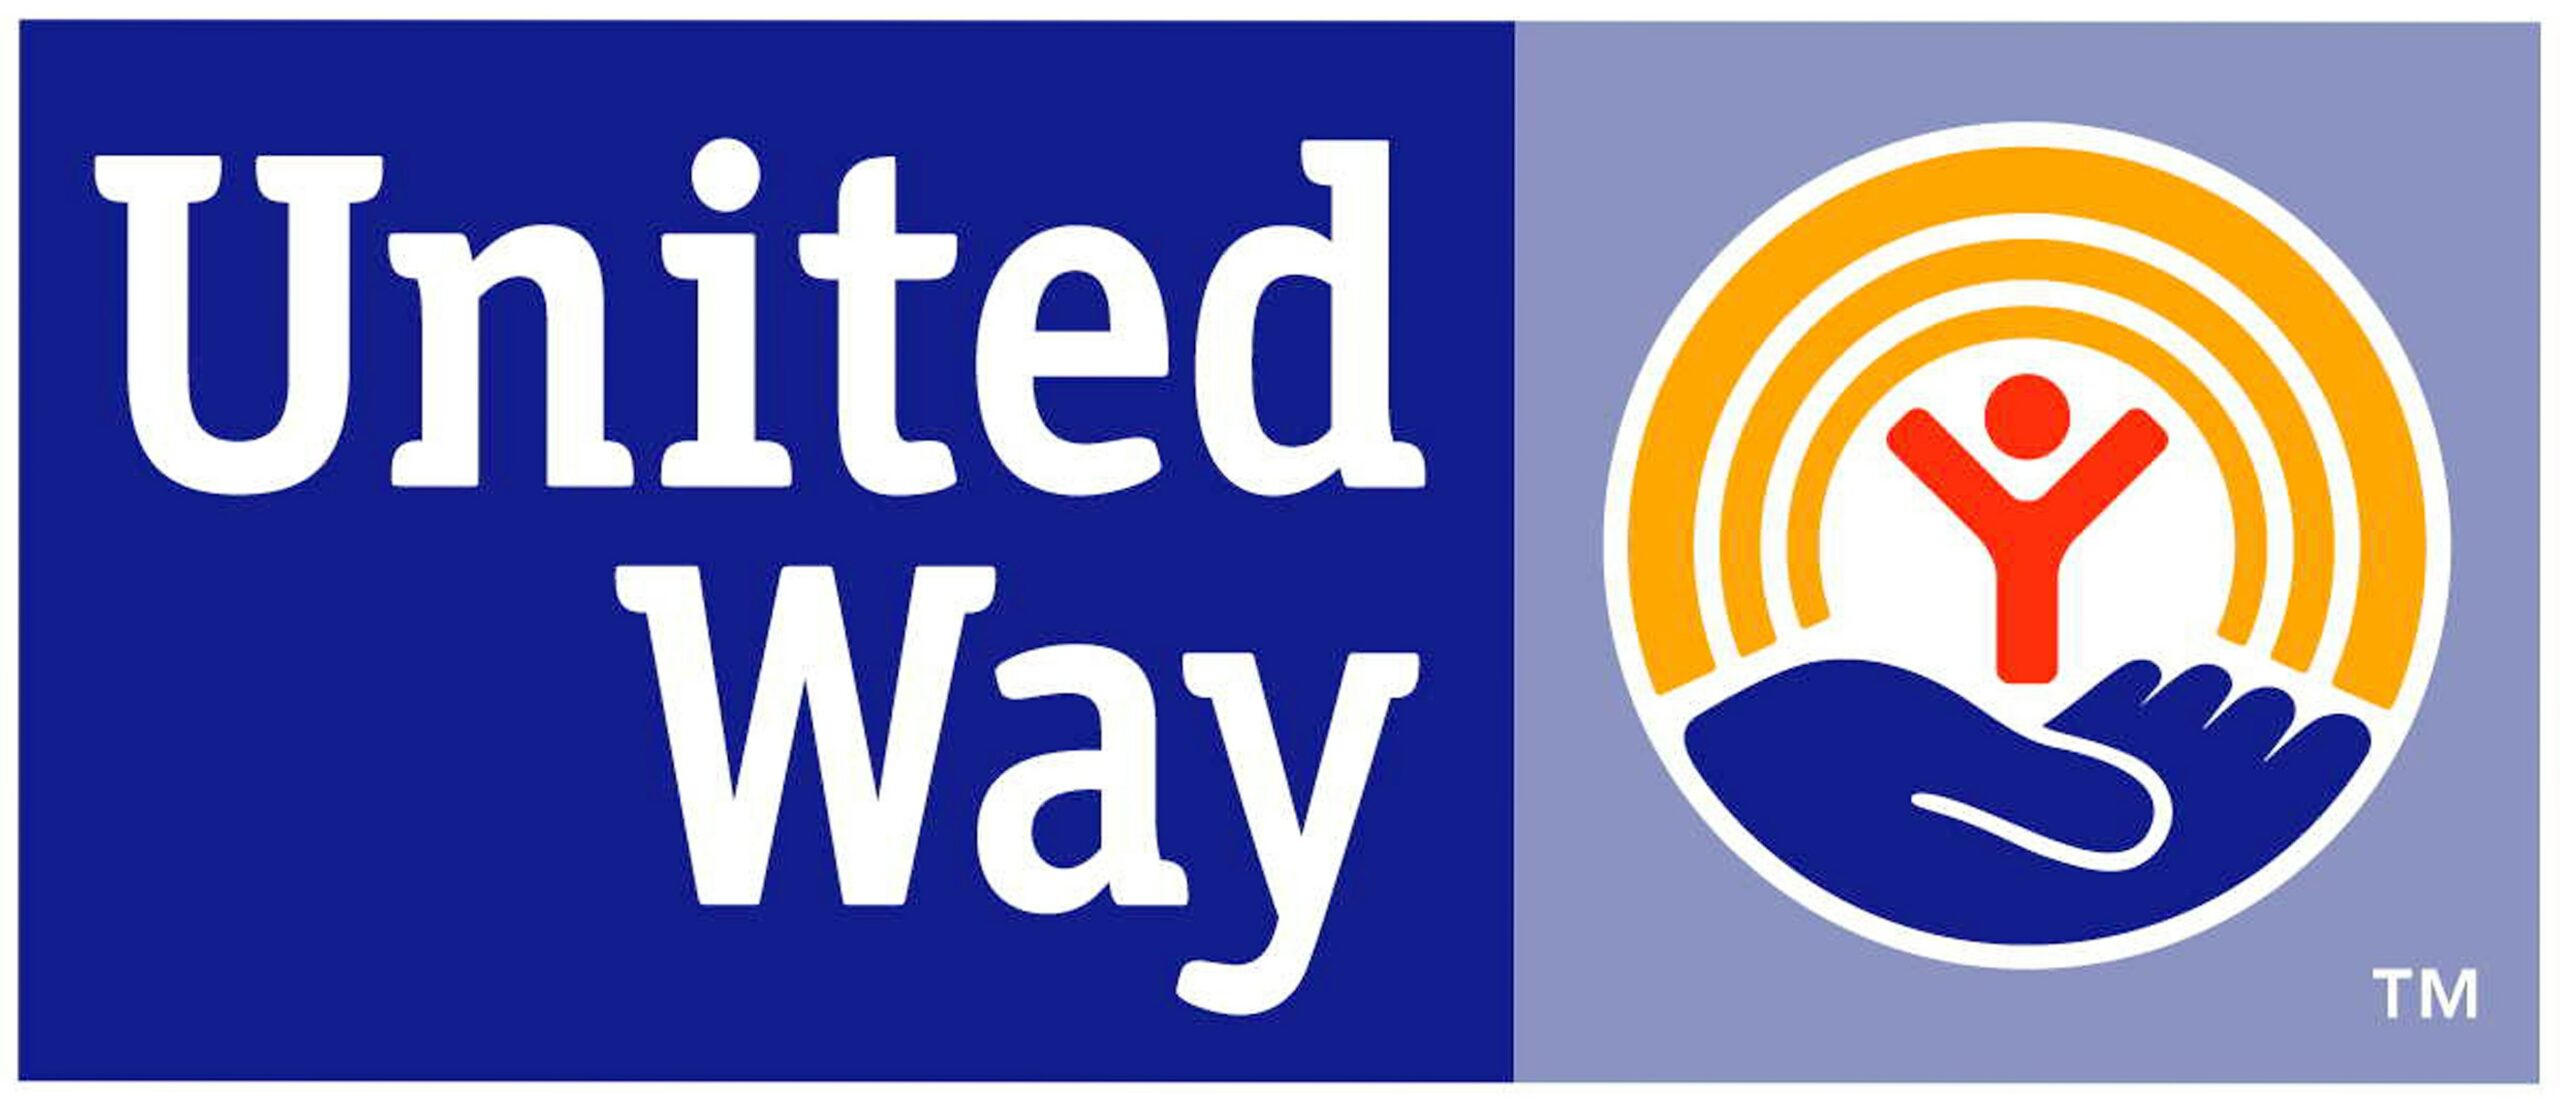 Link to the United Way website